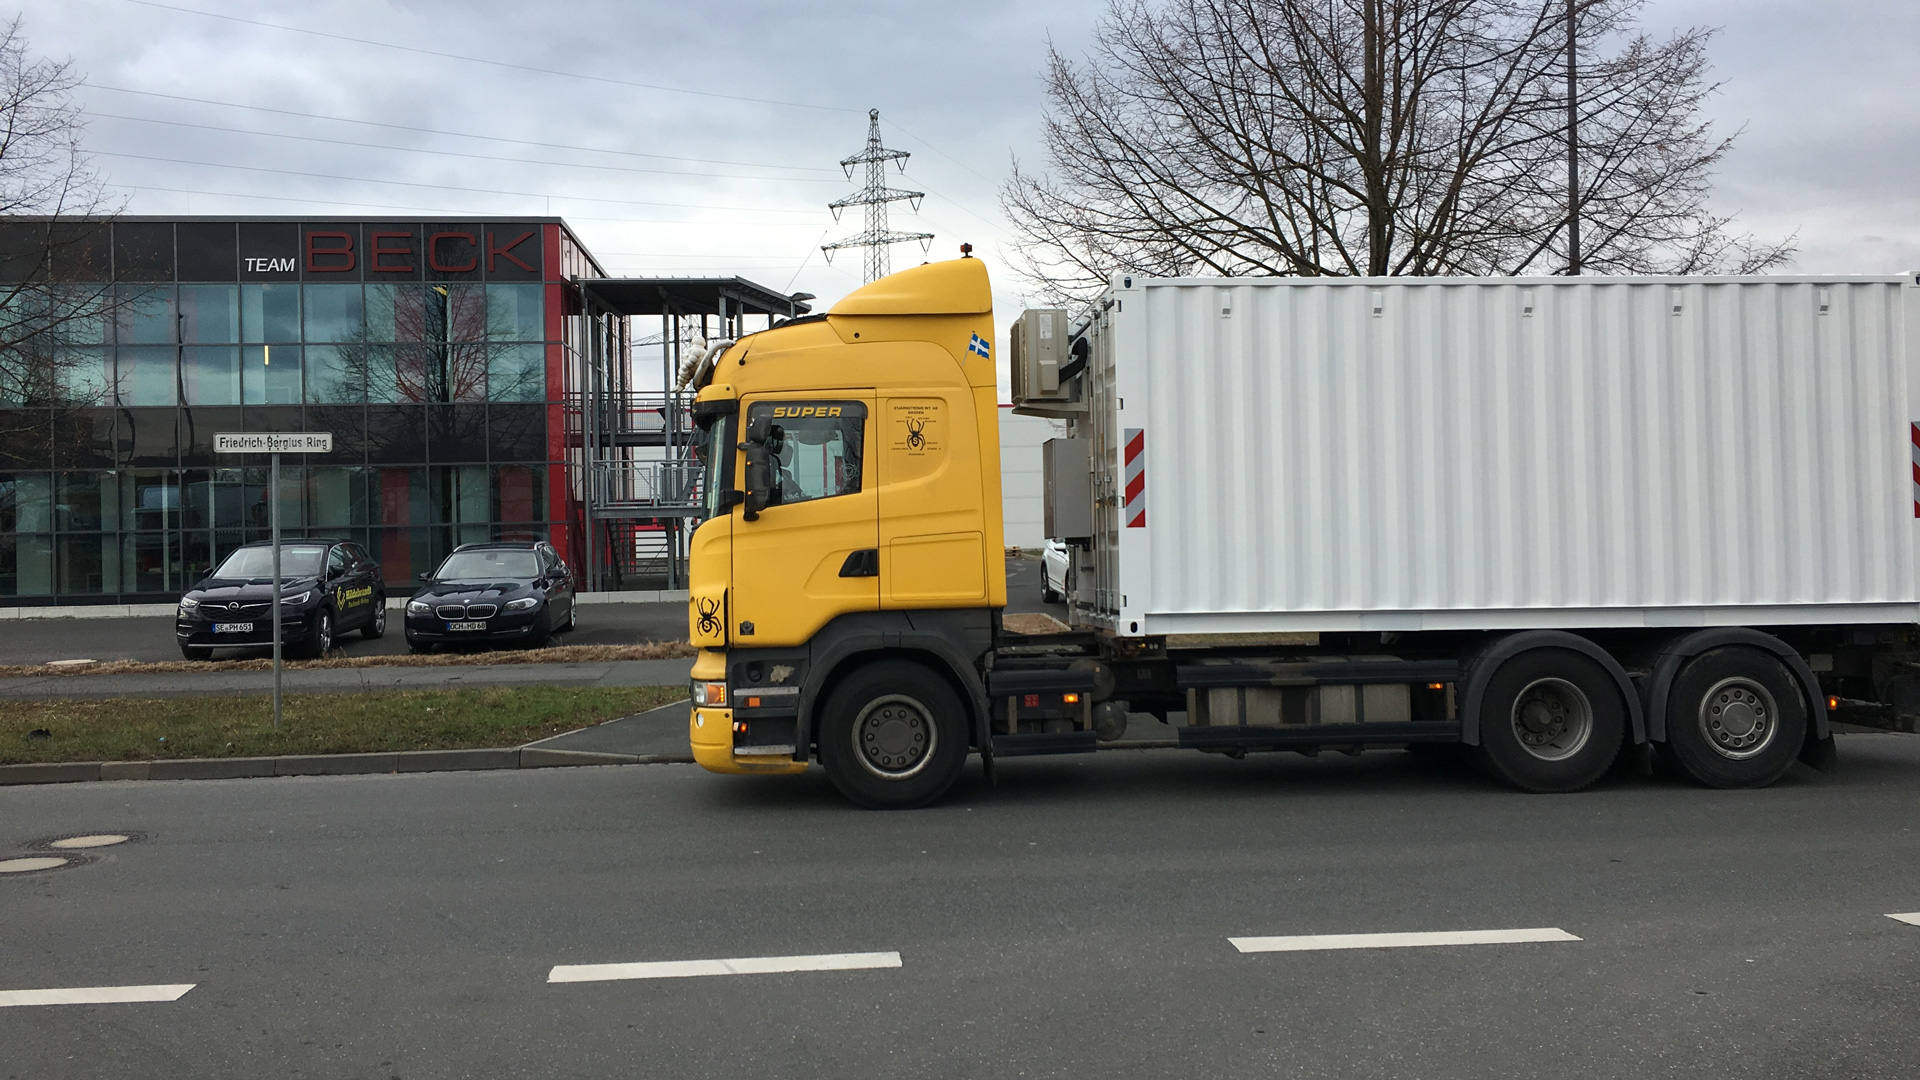 The battery storage facility is being transported by truck through Germany and Sweden running on biodiesel.